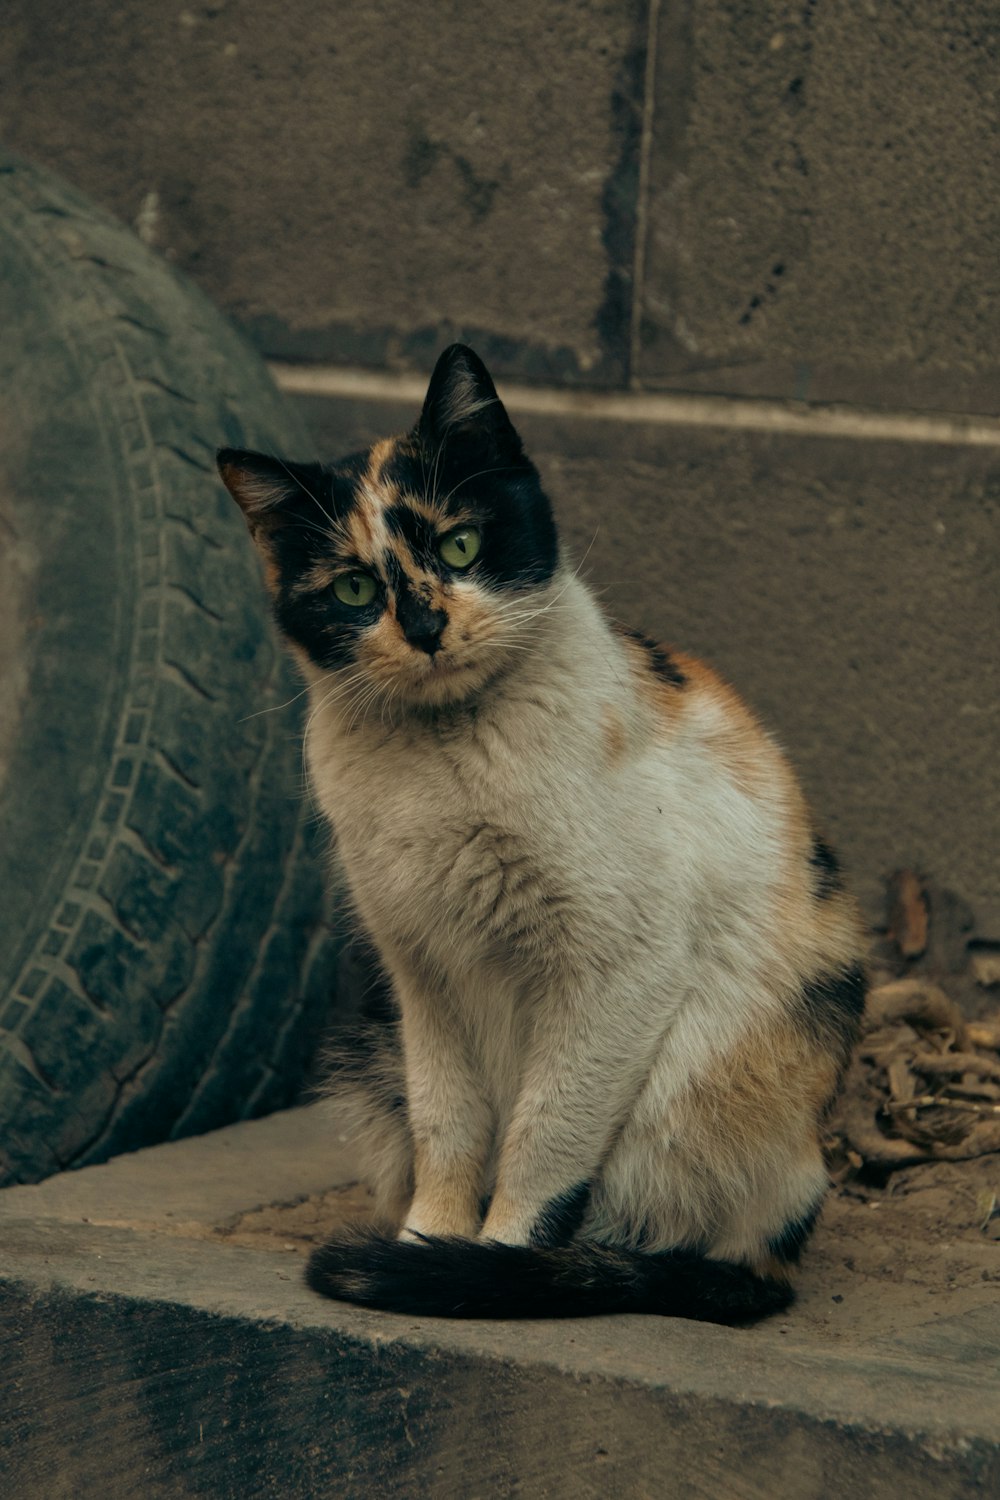 a cat sitting on a step next to a tire